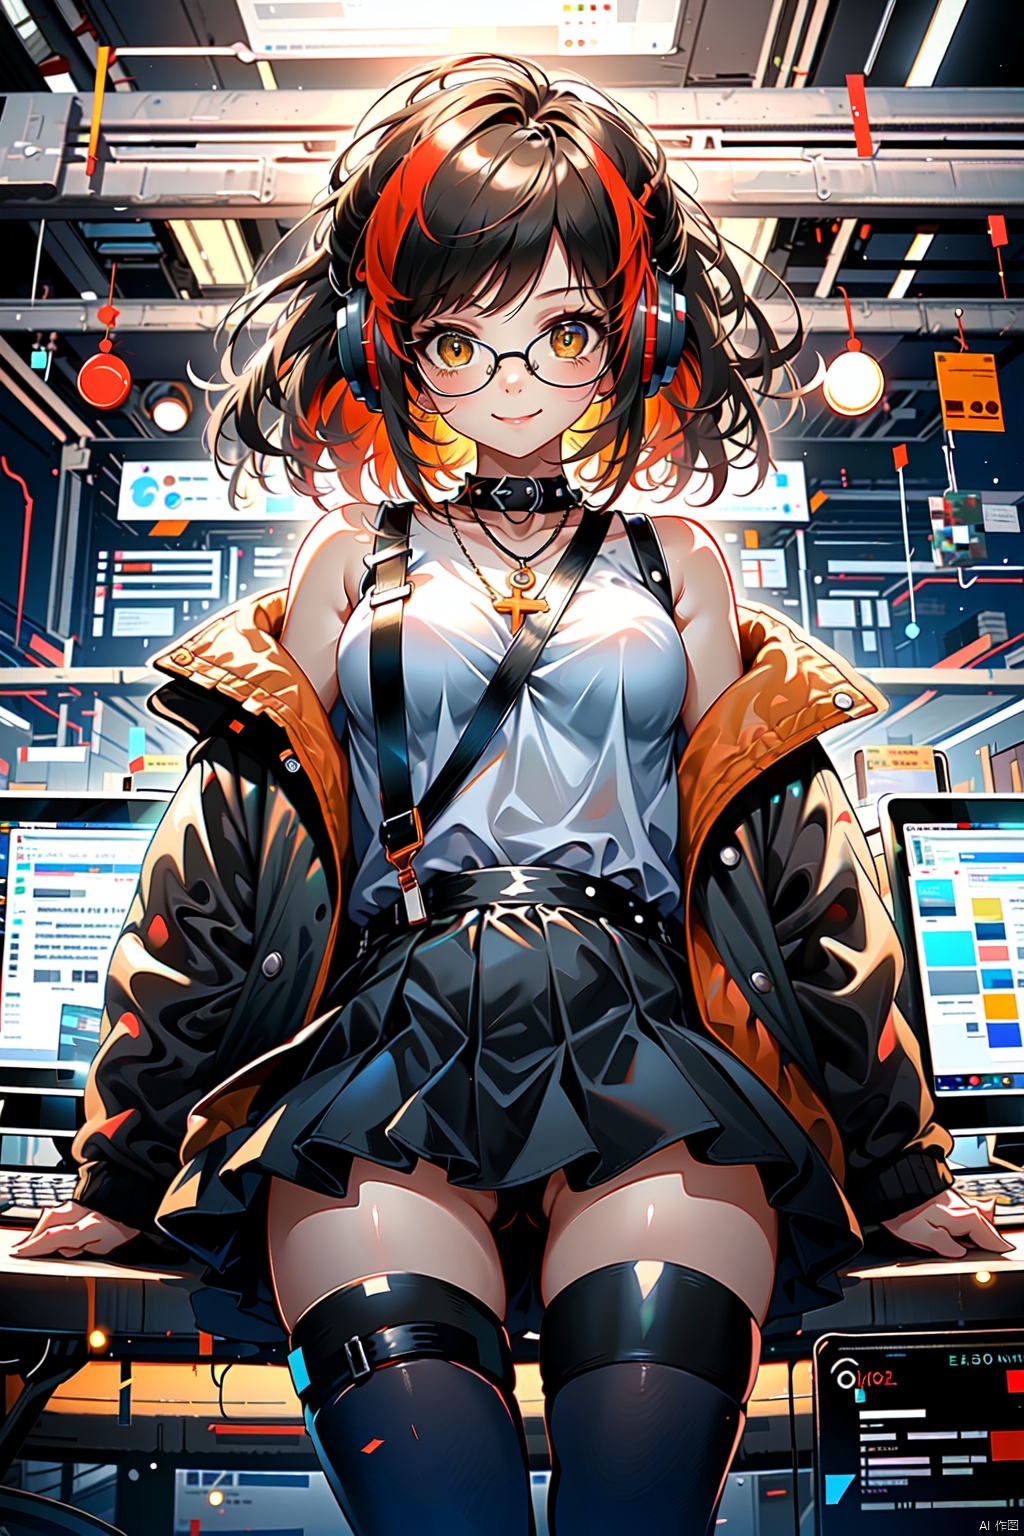  1 girl，In front of the computer, fire red Hair,Golden pupils, golden eyes, black-rimmed glasses, headphones hanging around the neck, cold eyes, smiling mouth, double ponytails, double braided hair, big bow, Cyberpunk style, suspender jacket, off-the-shoulder, leather pleated skirt, black over-the-knee socks, rivet boots, holding glasses by hand,